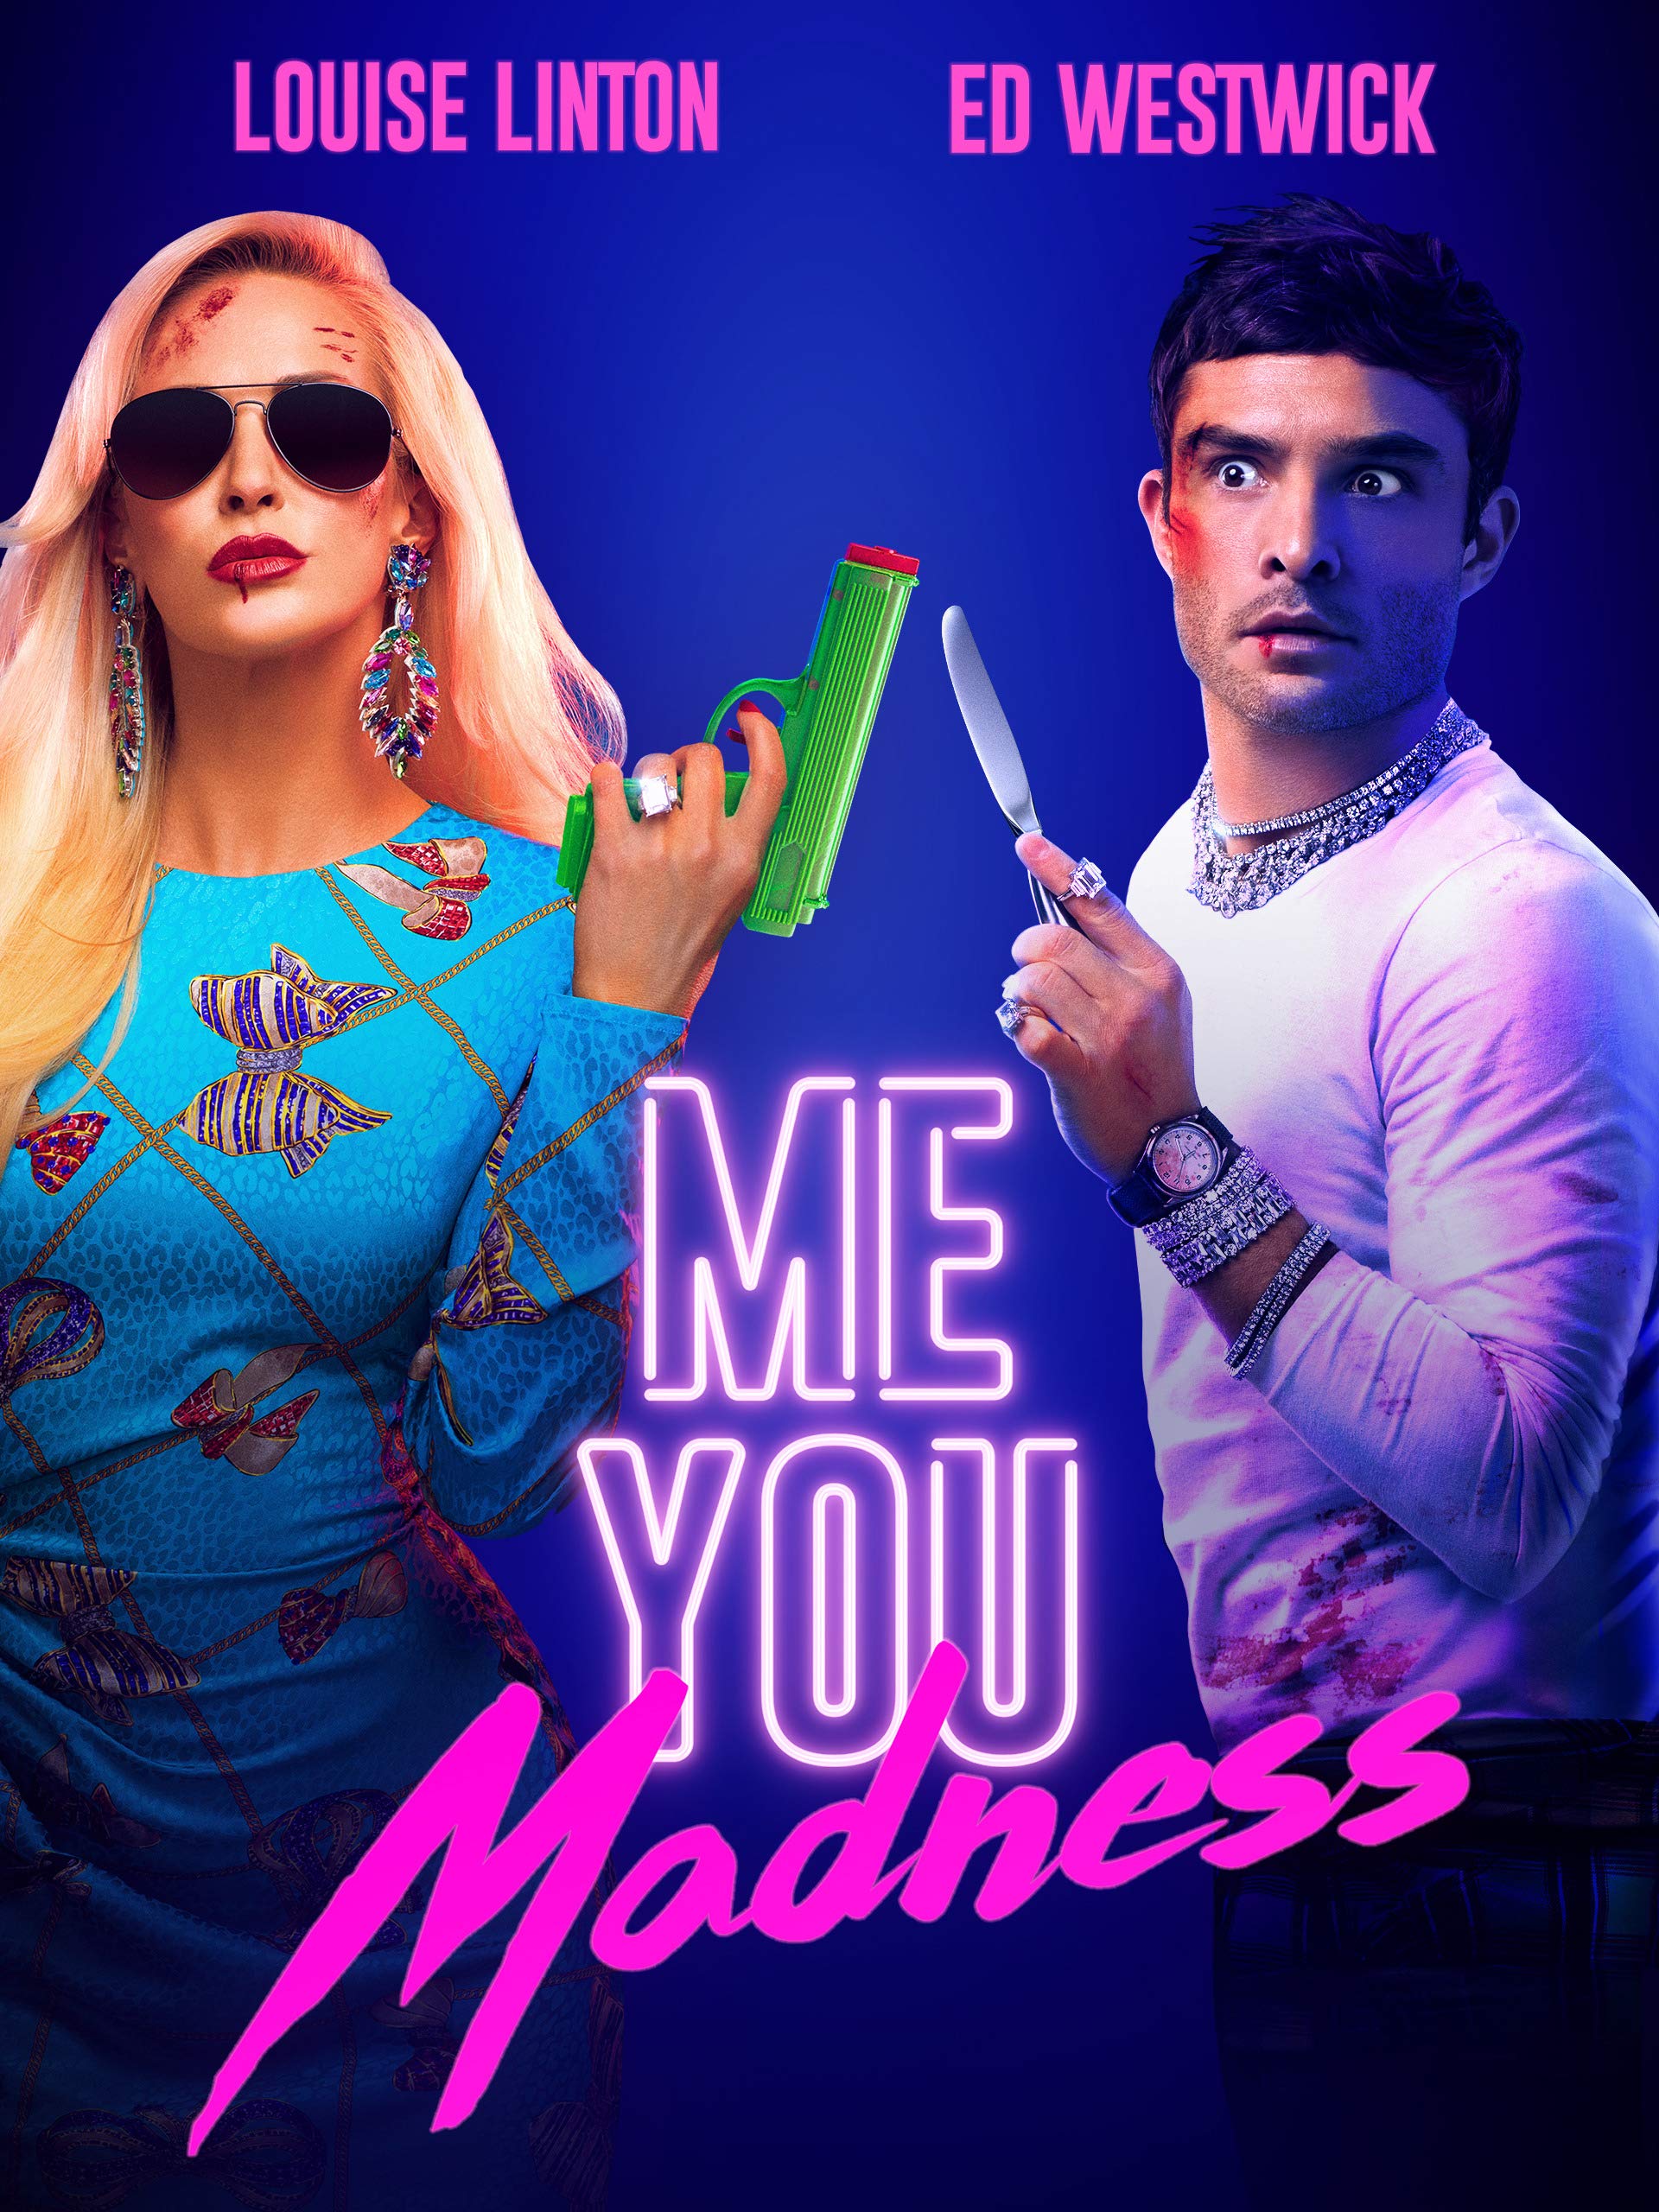 Official movie poster for Me You Madness